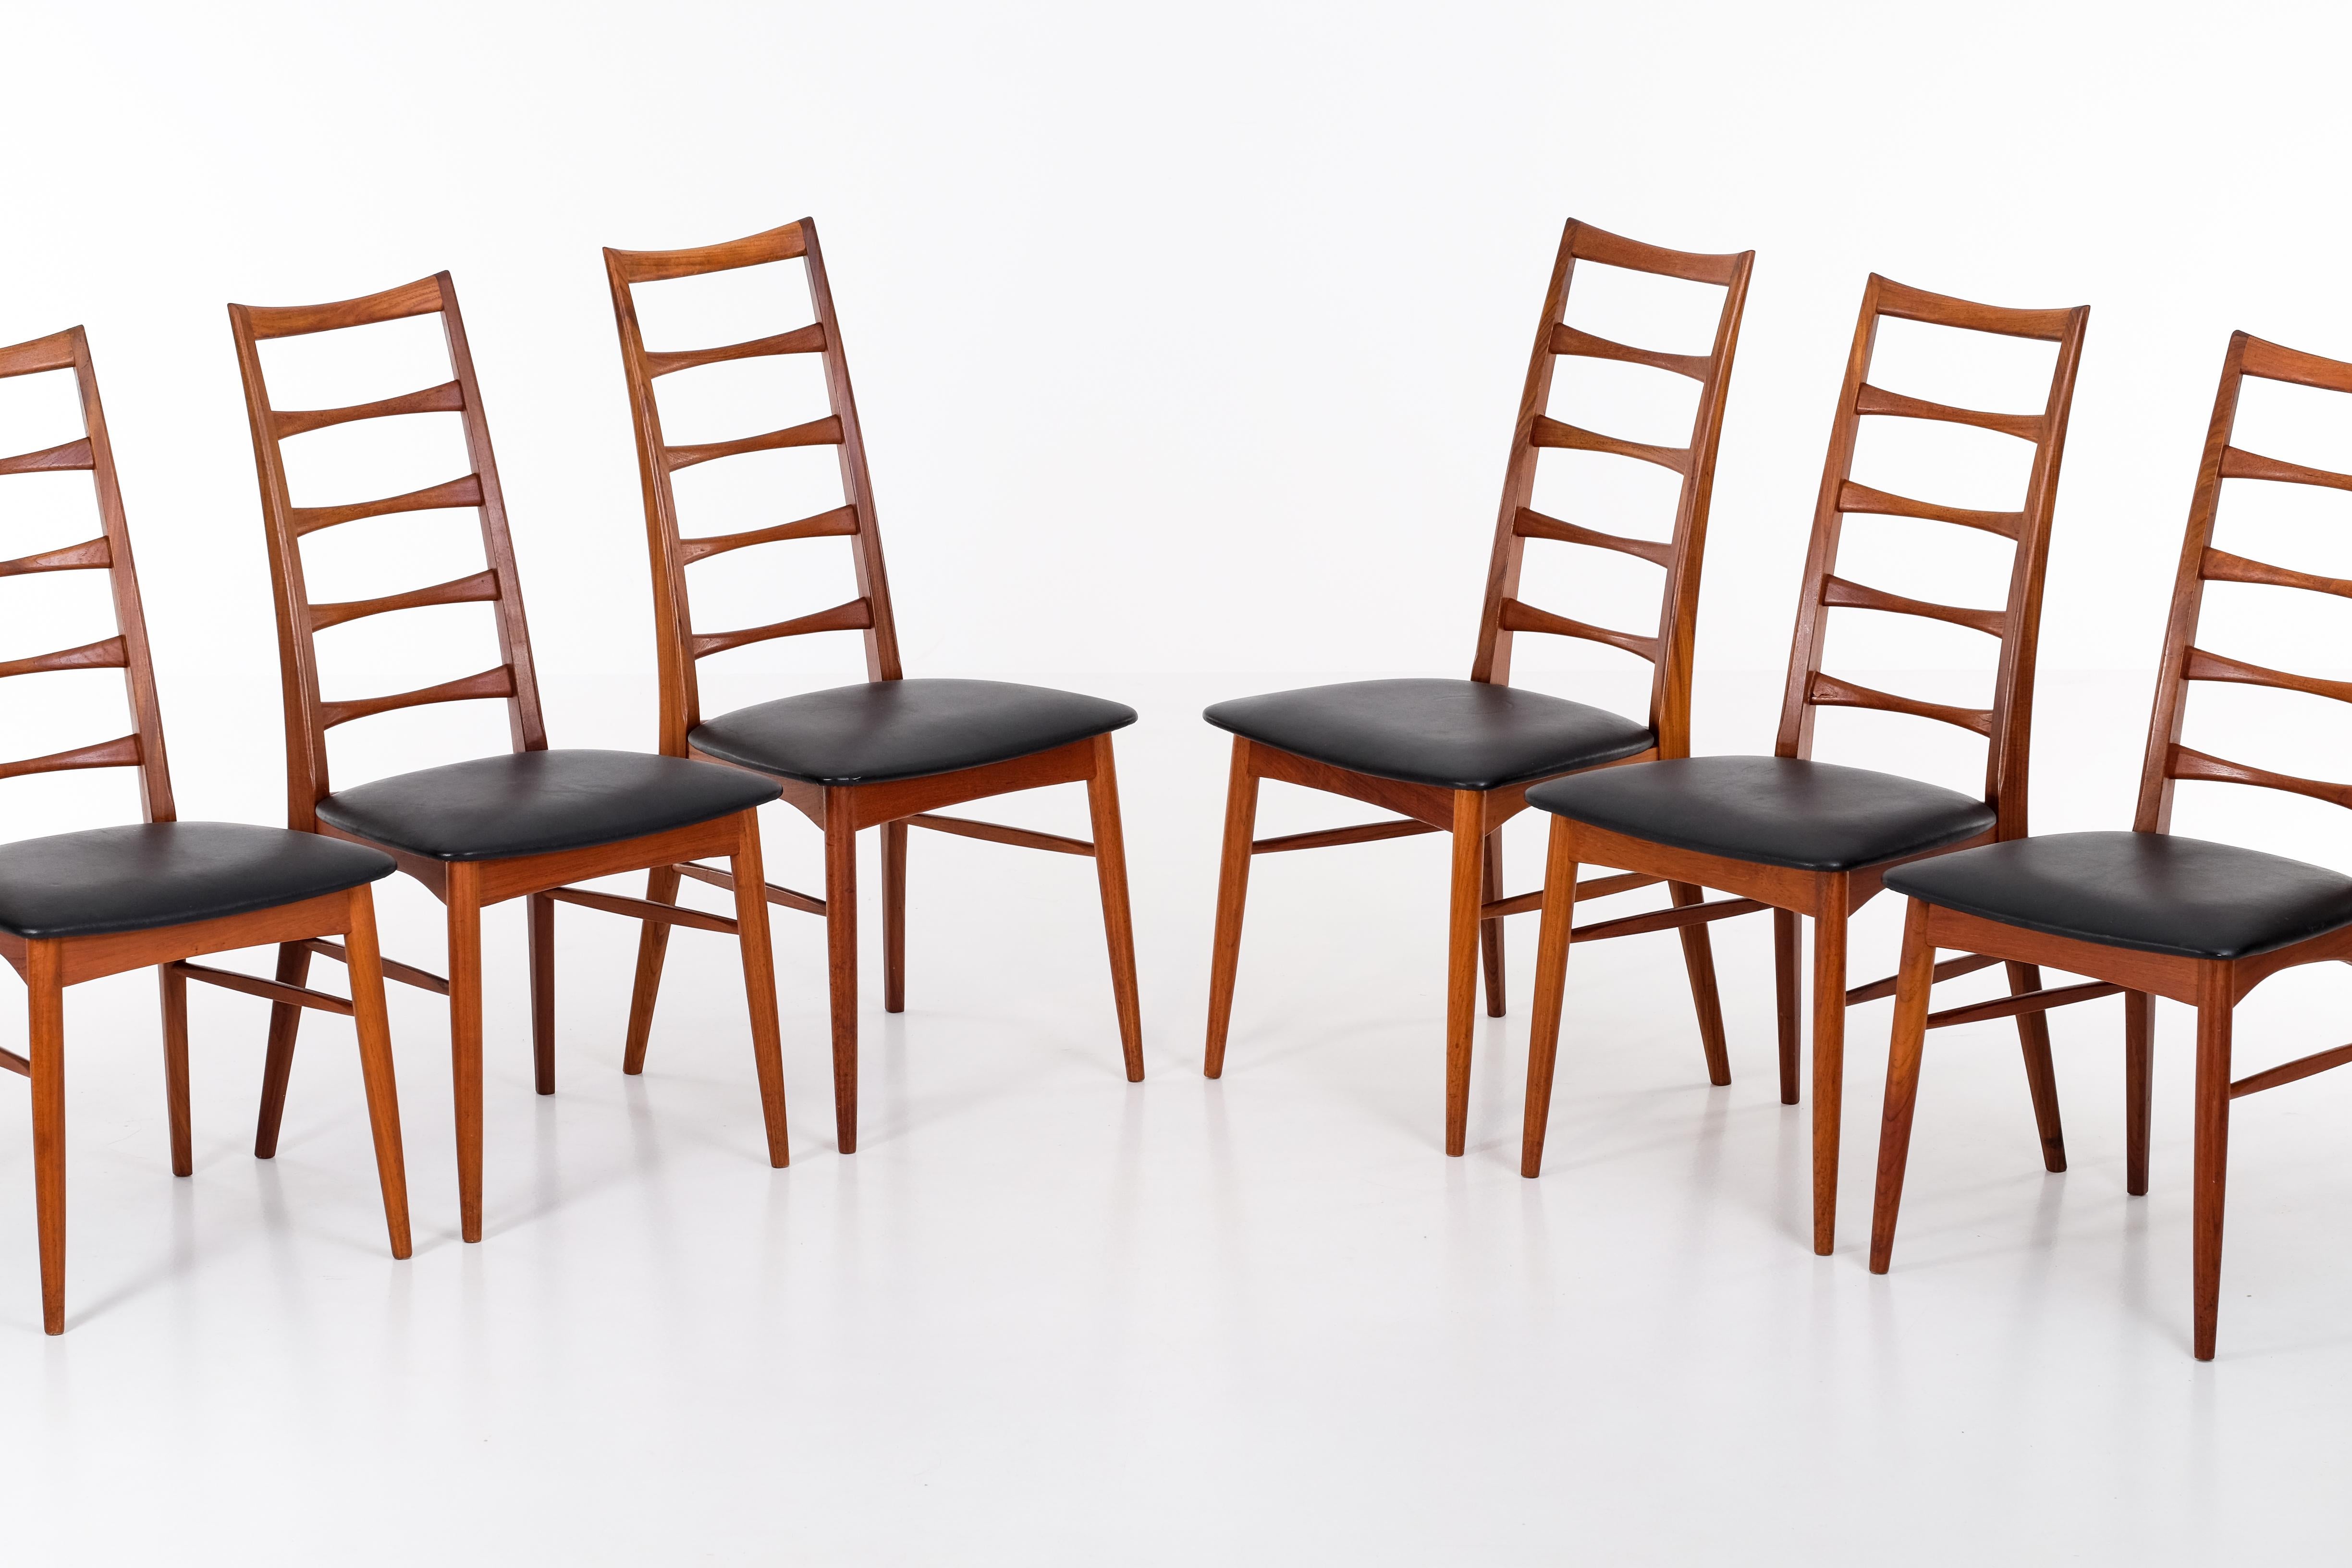 Danish Set of 6 'Lis' chairs by Niels Koefoed, Denmark, 1960s For Sale